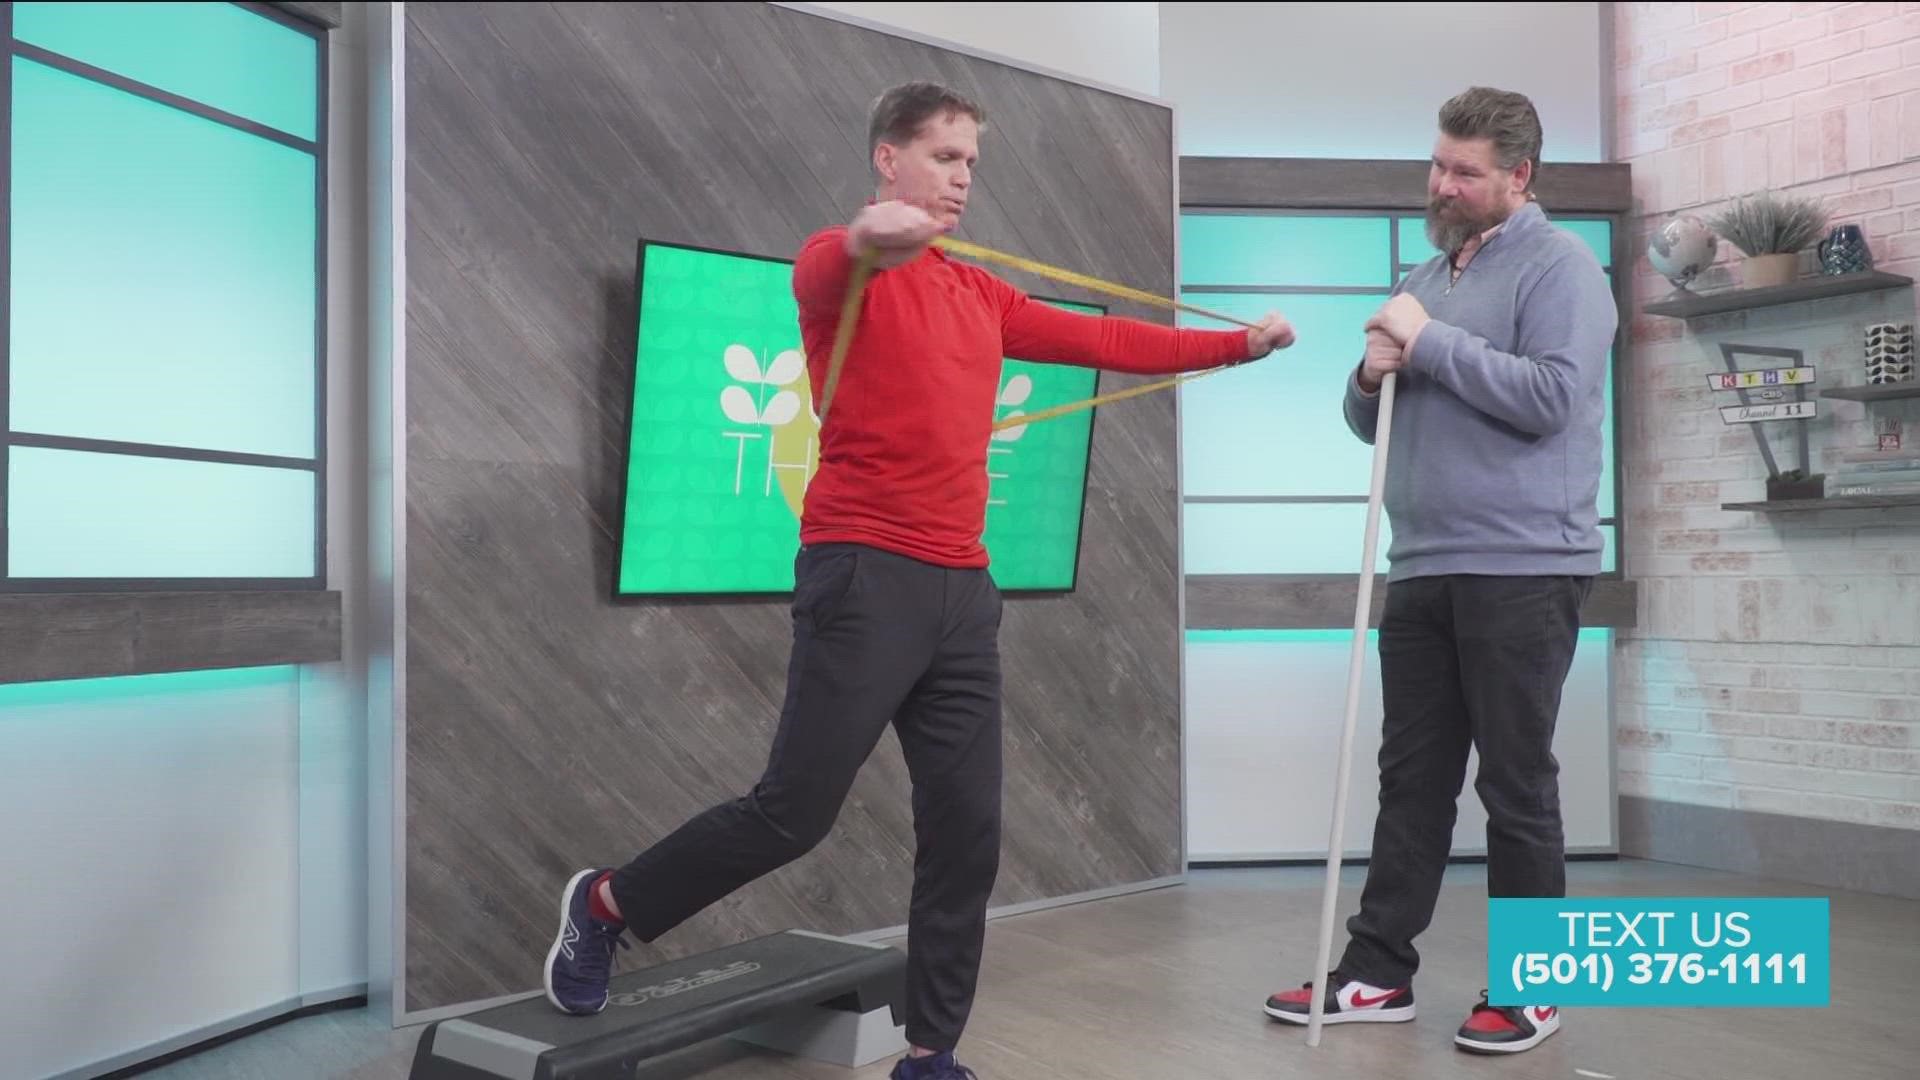 Jeff McDaniel is back in studio with an easy and quick workout anyone can do.